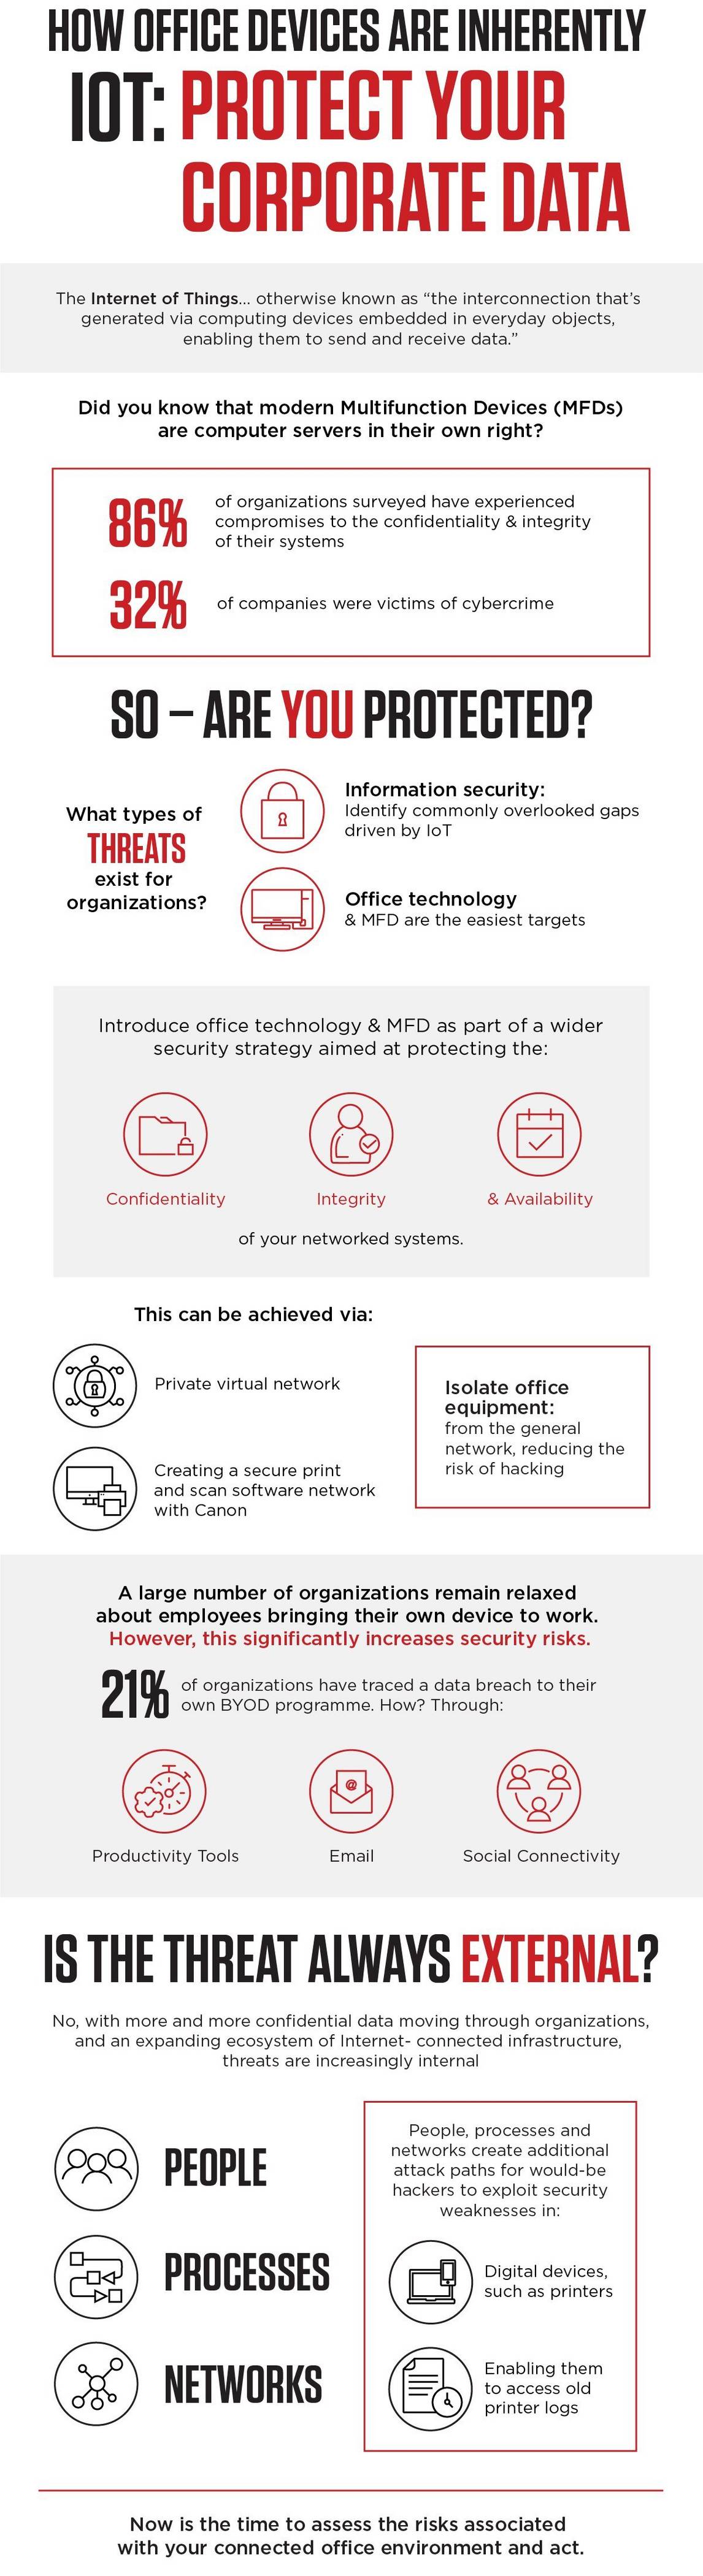 Infographic IoT Offices